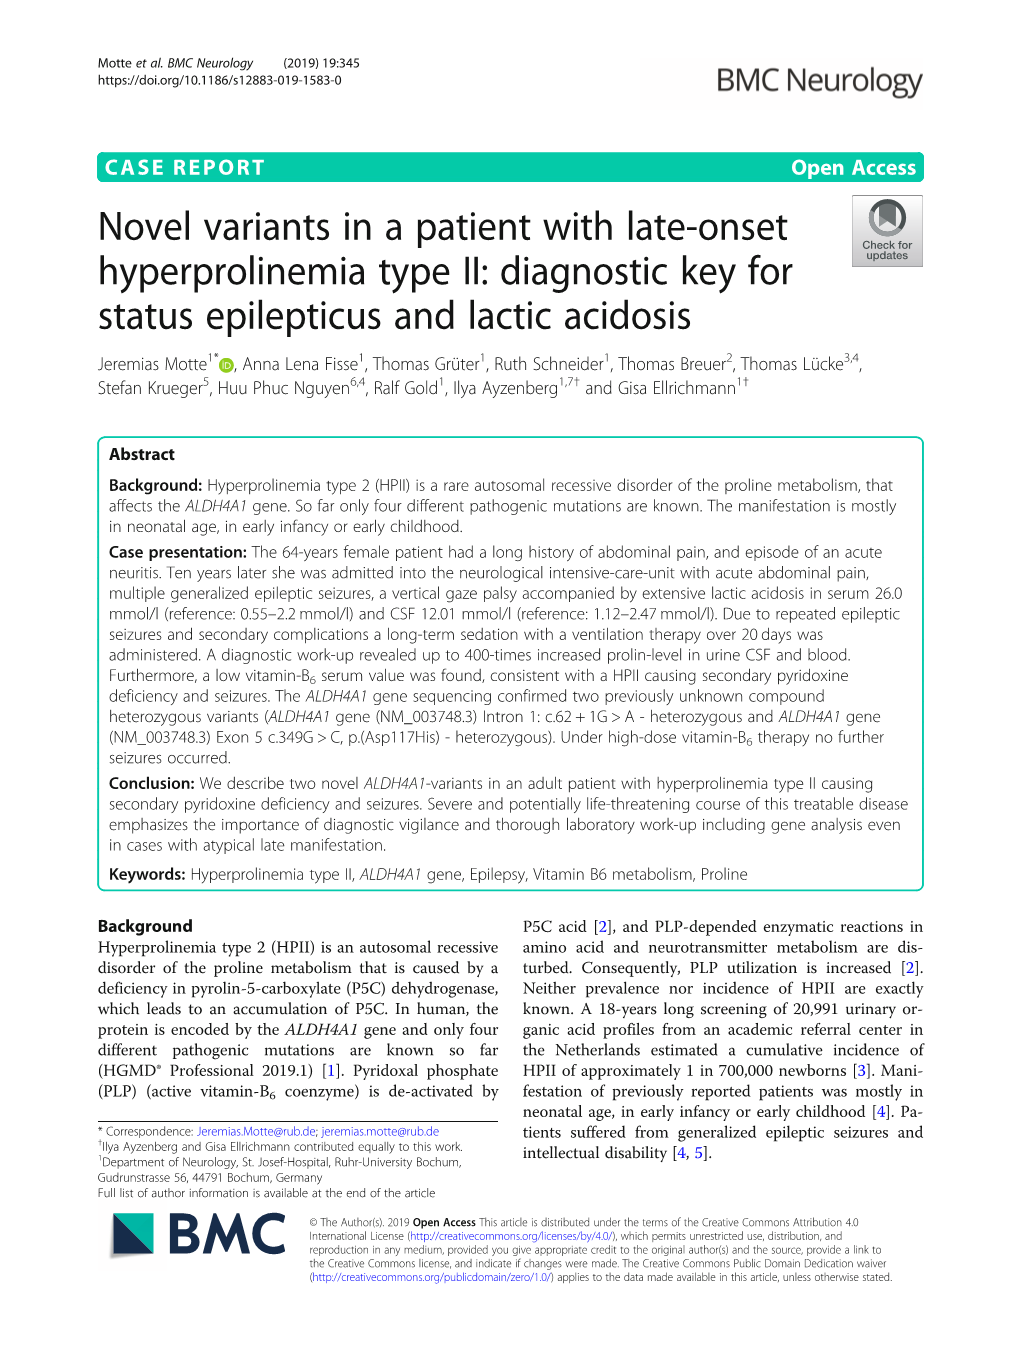 Novel Variants in a Patient with Late-Onset Hyperprolinemia Type II